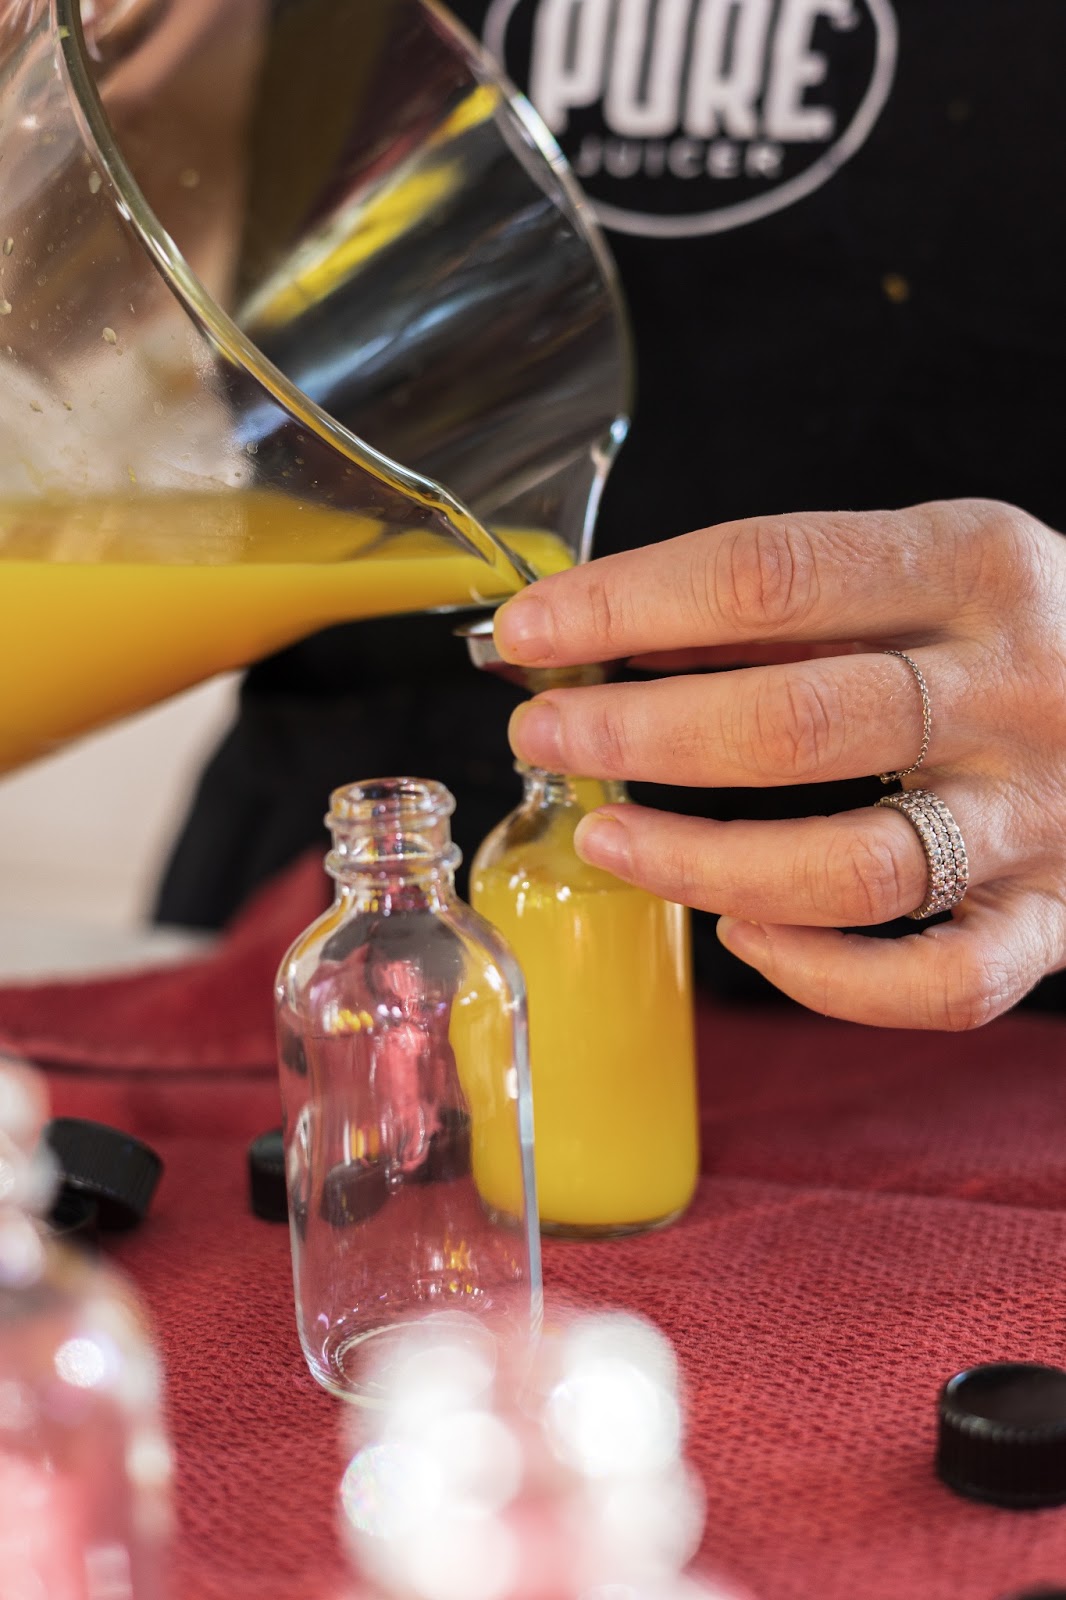 A PURE kitchen tester pours wellness shots made out of ginger, turmeric, lemons, and oranges into a small glass bottle.